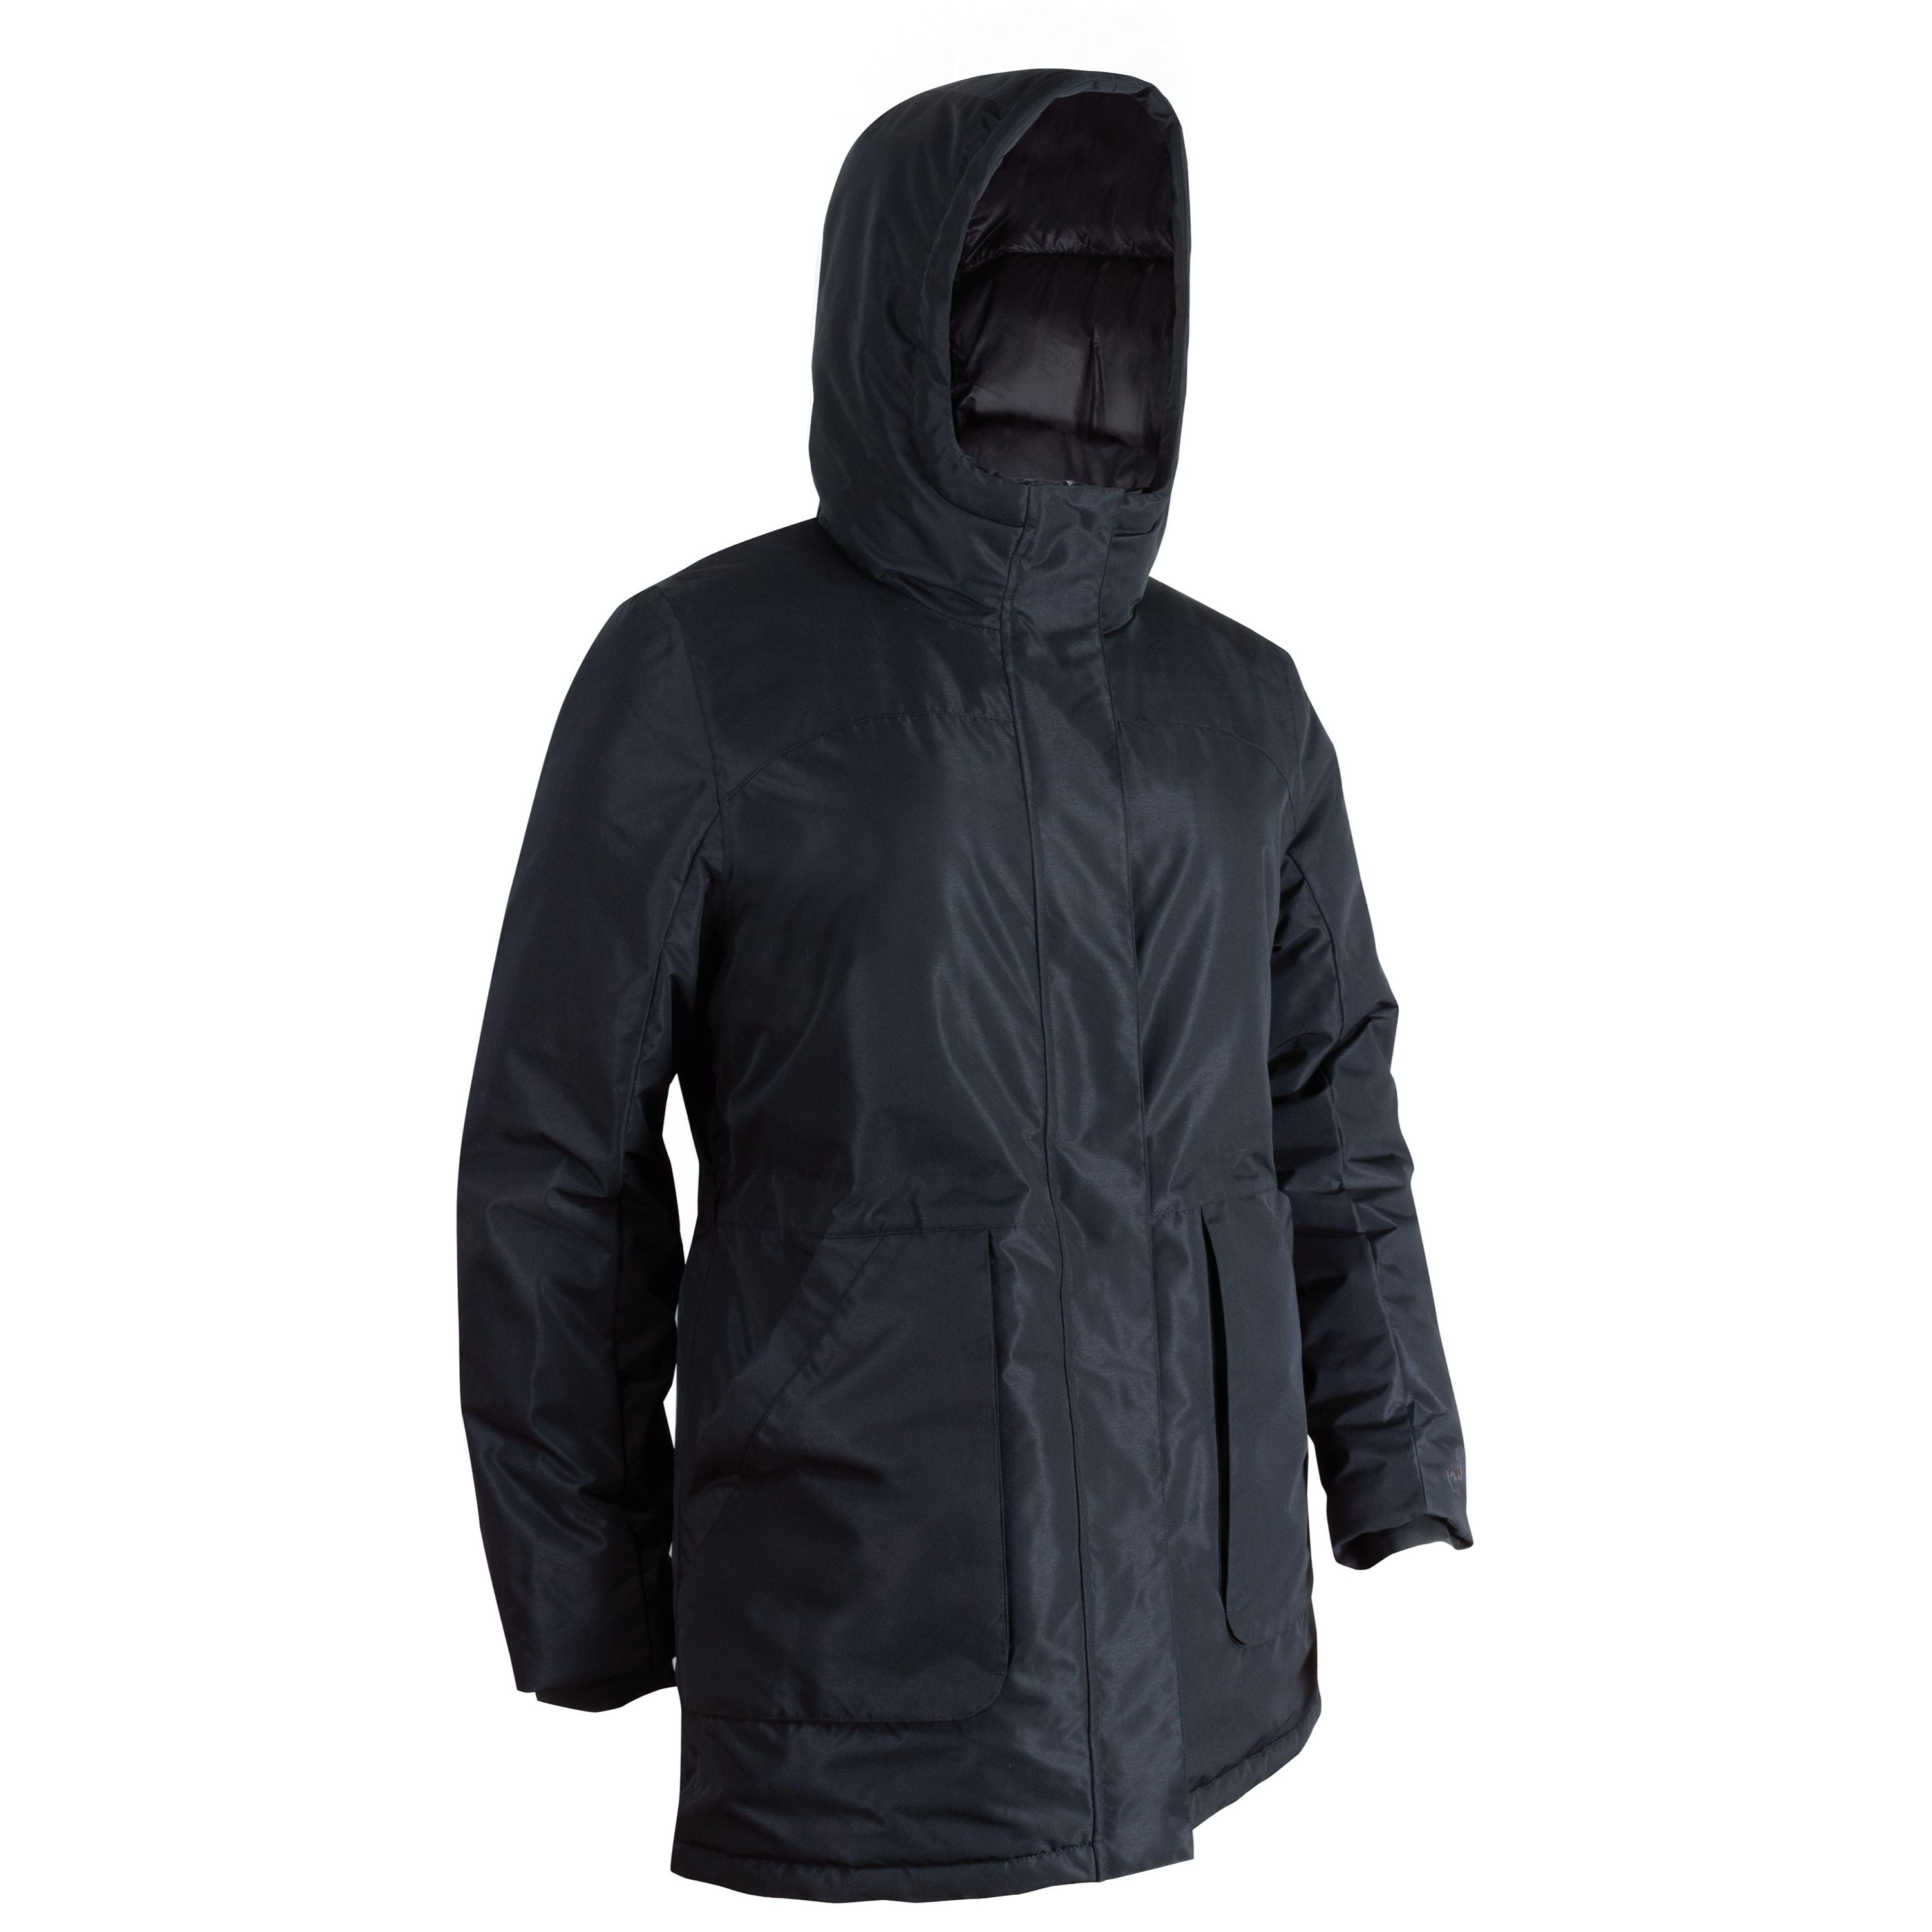 "Grand lux" insulated winter jacket - Women's